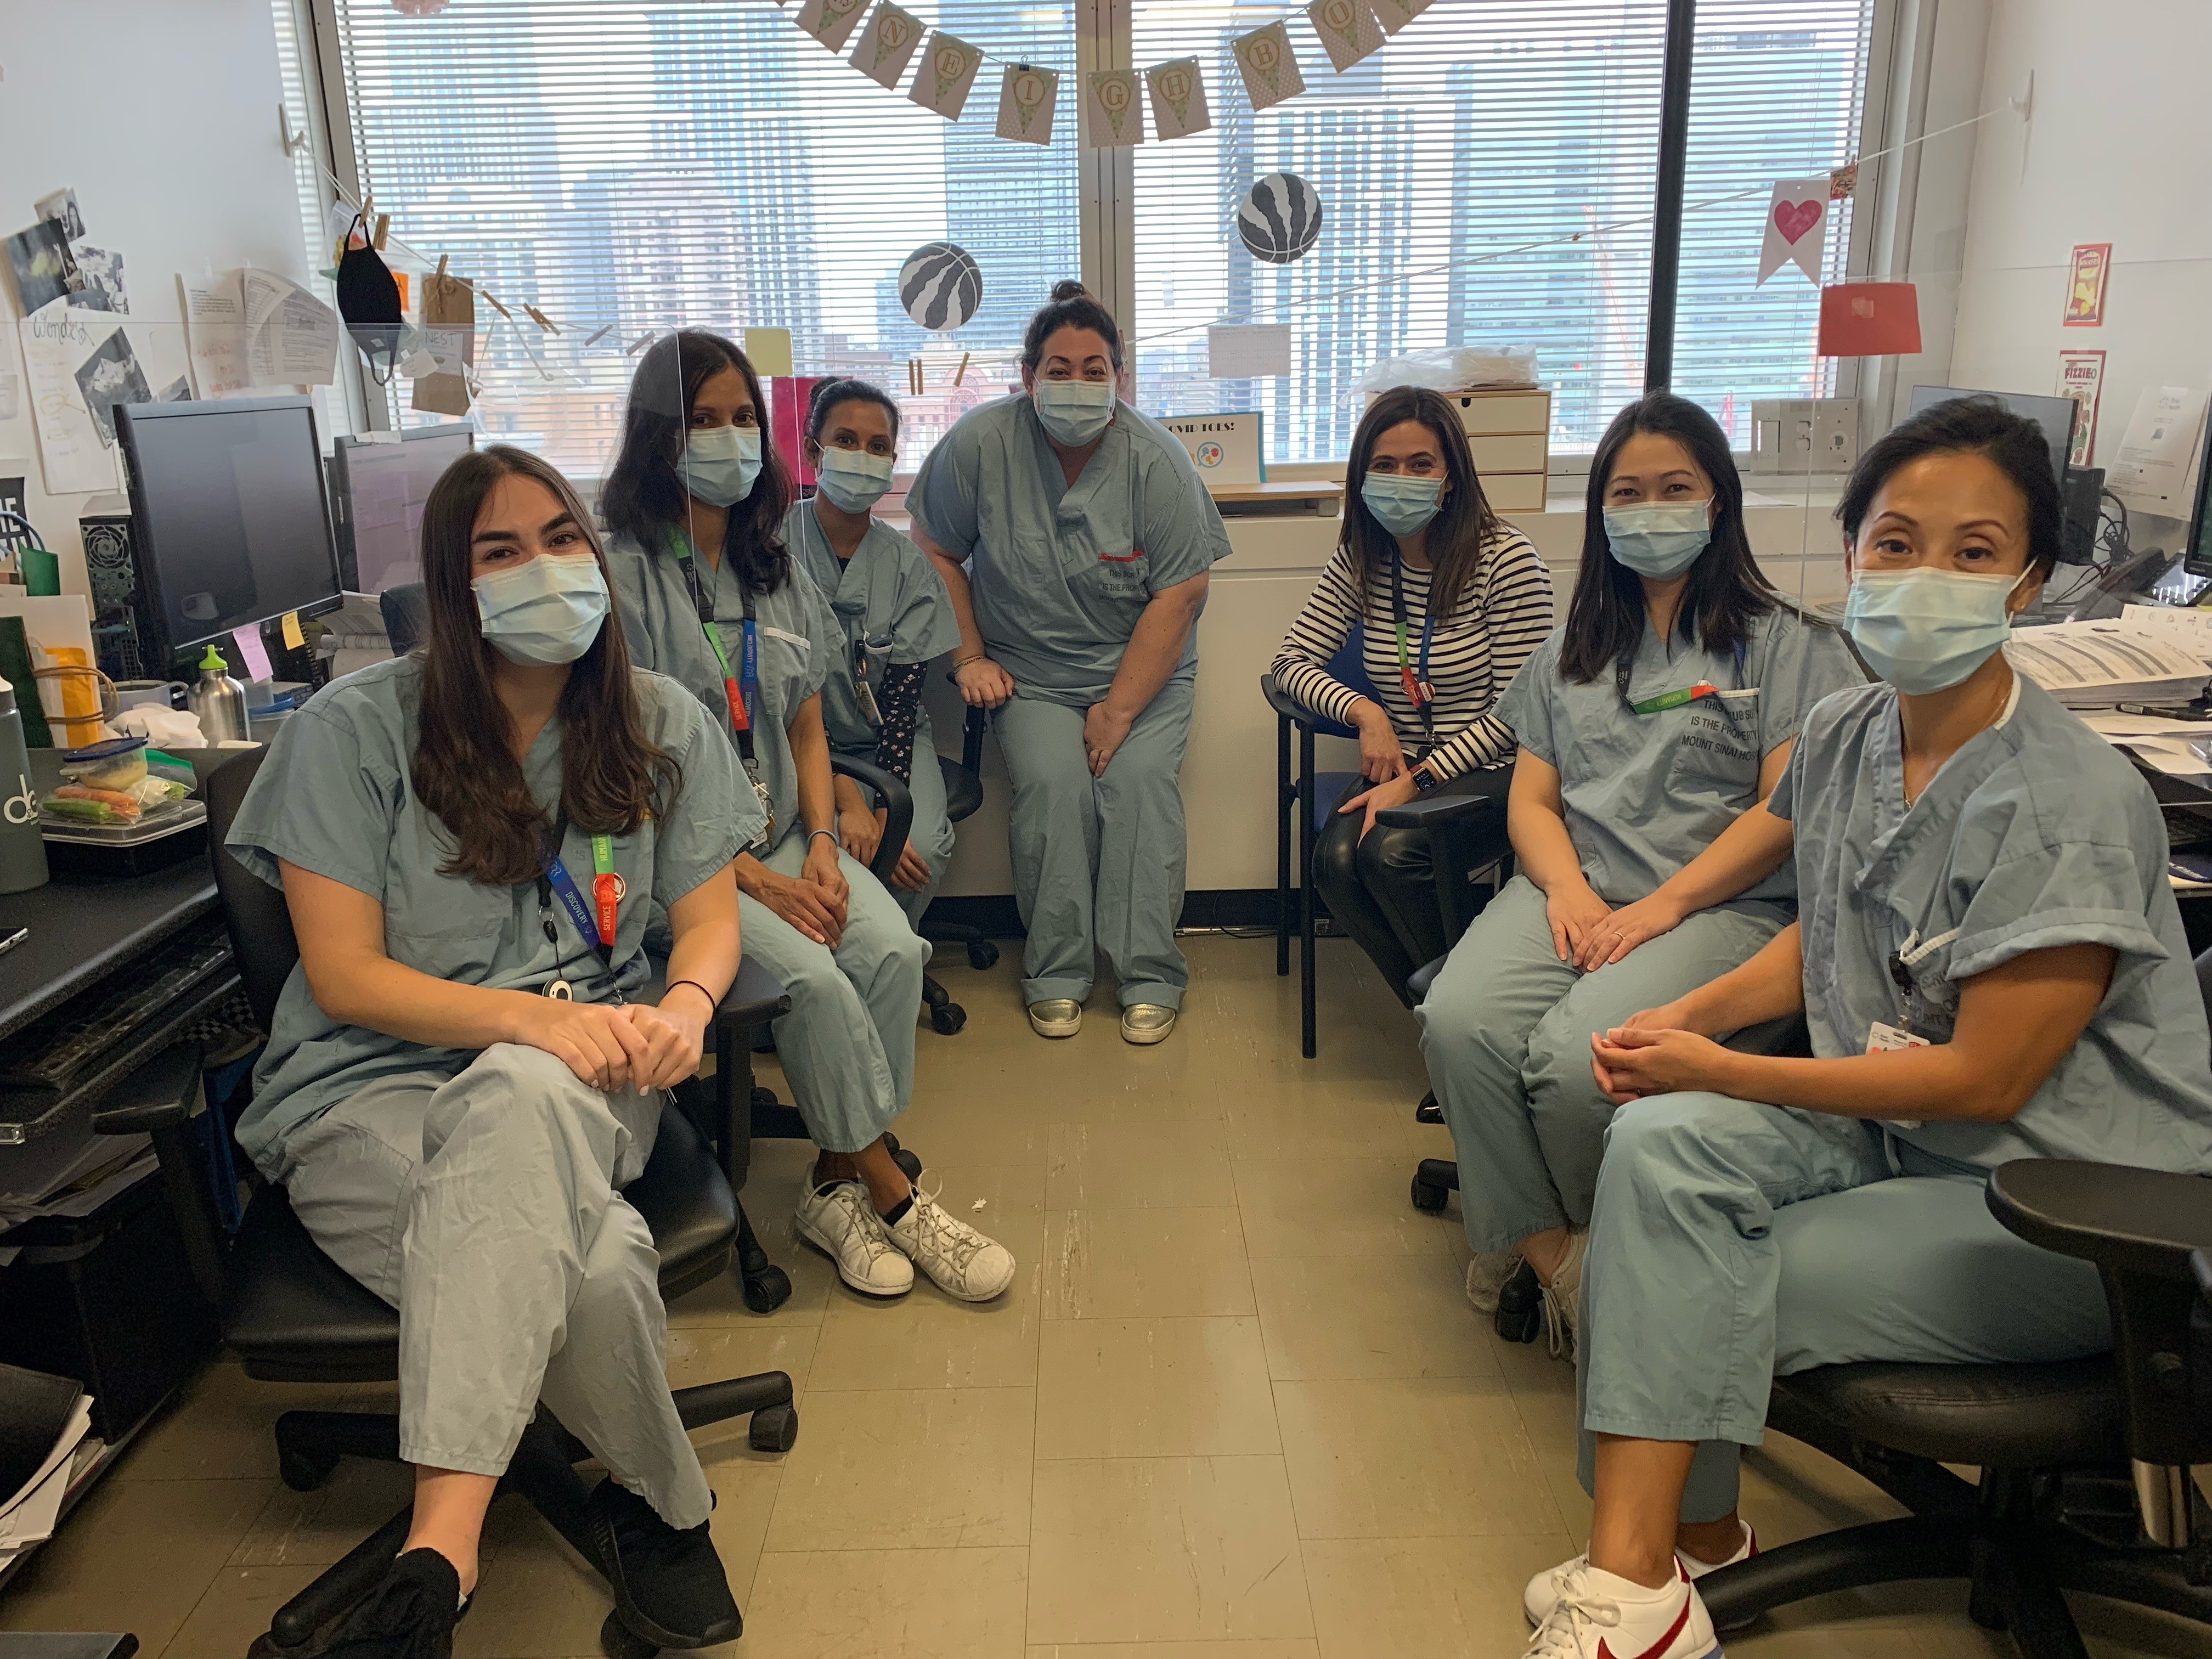 A group of people in an office setting. They are healthcare workers wearing masks and scrubs, seated and looking at the camera